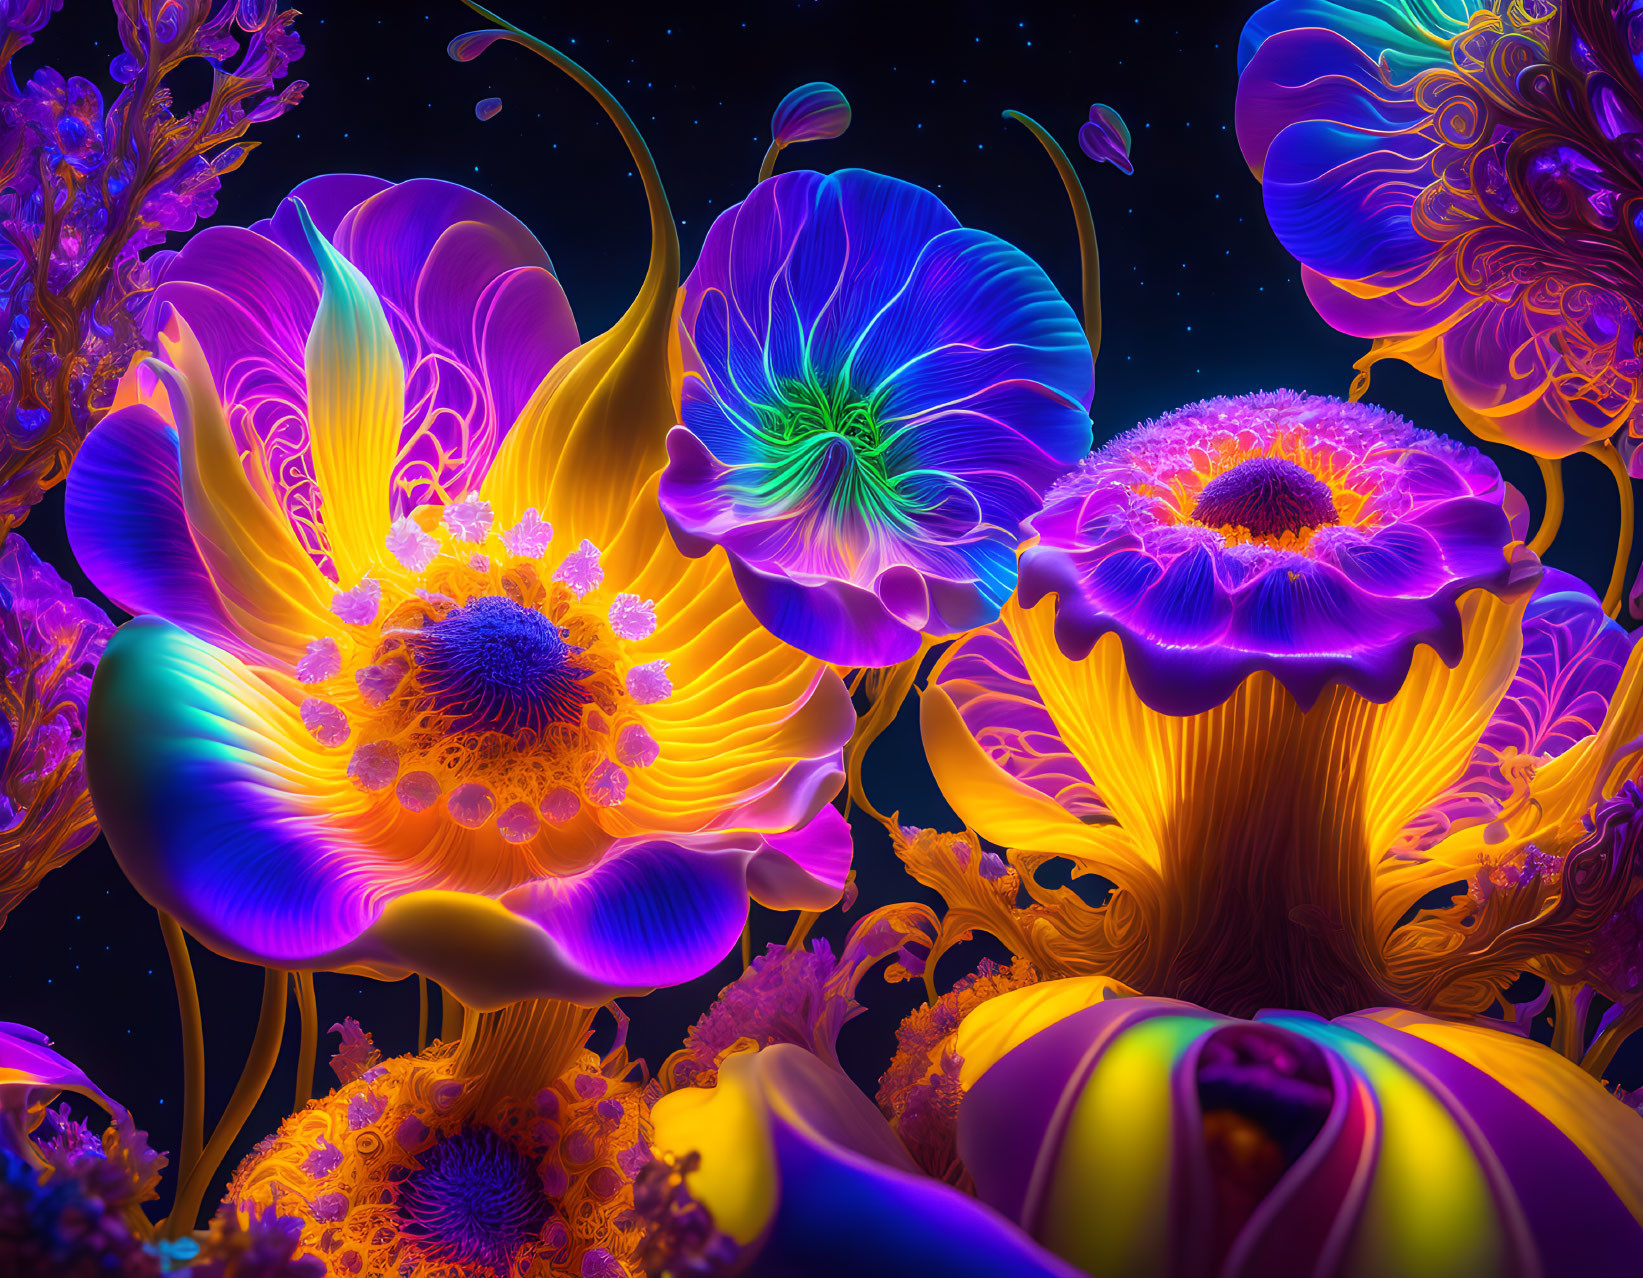 Neon-Colored Flowers on Cosmic Background with Glowing Edges